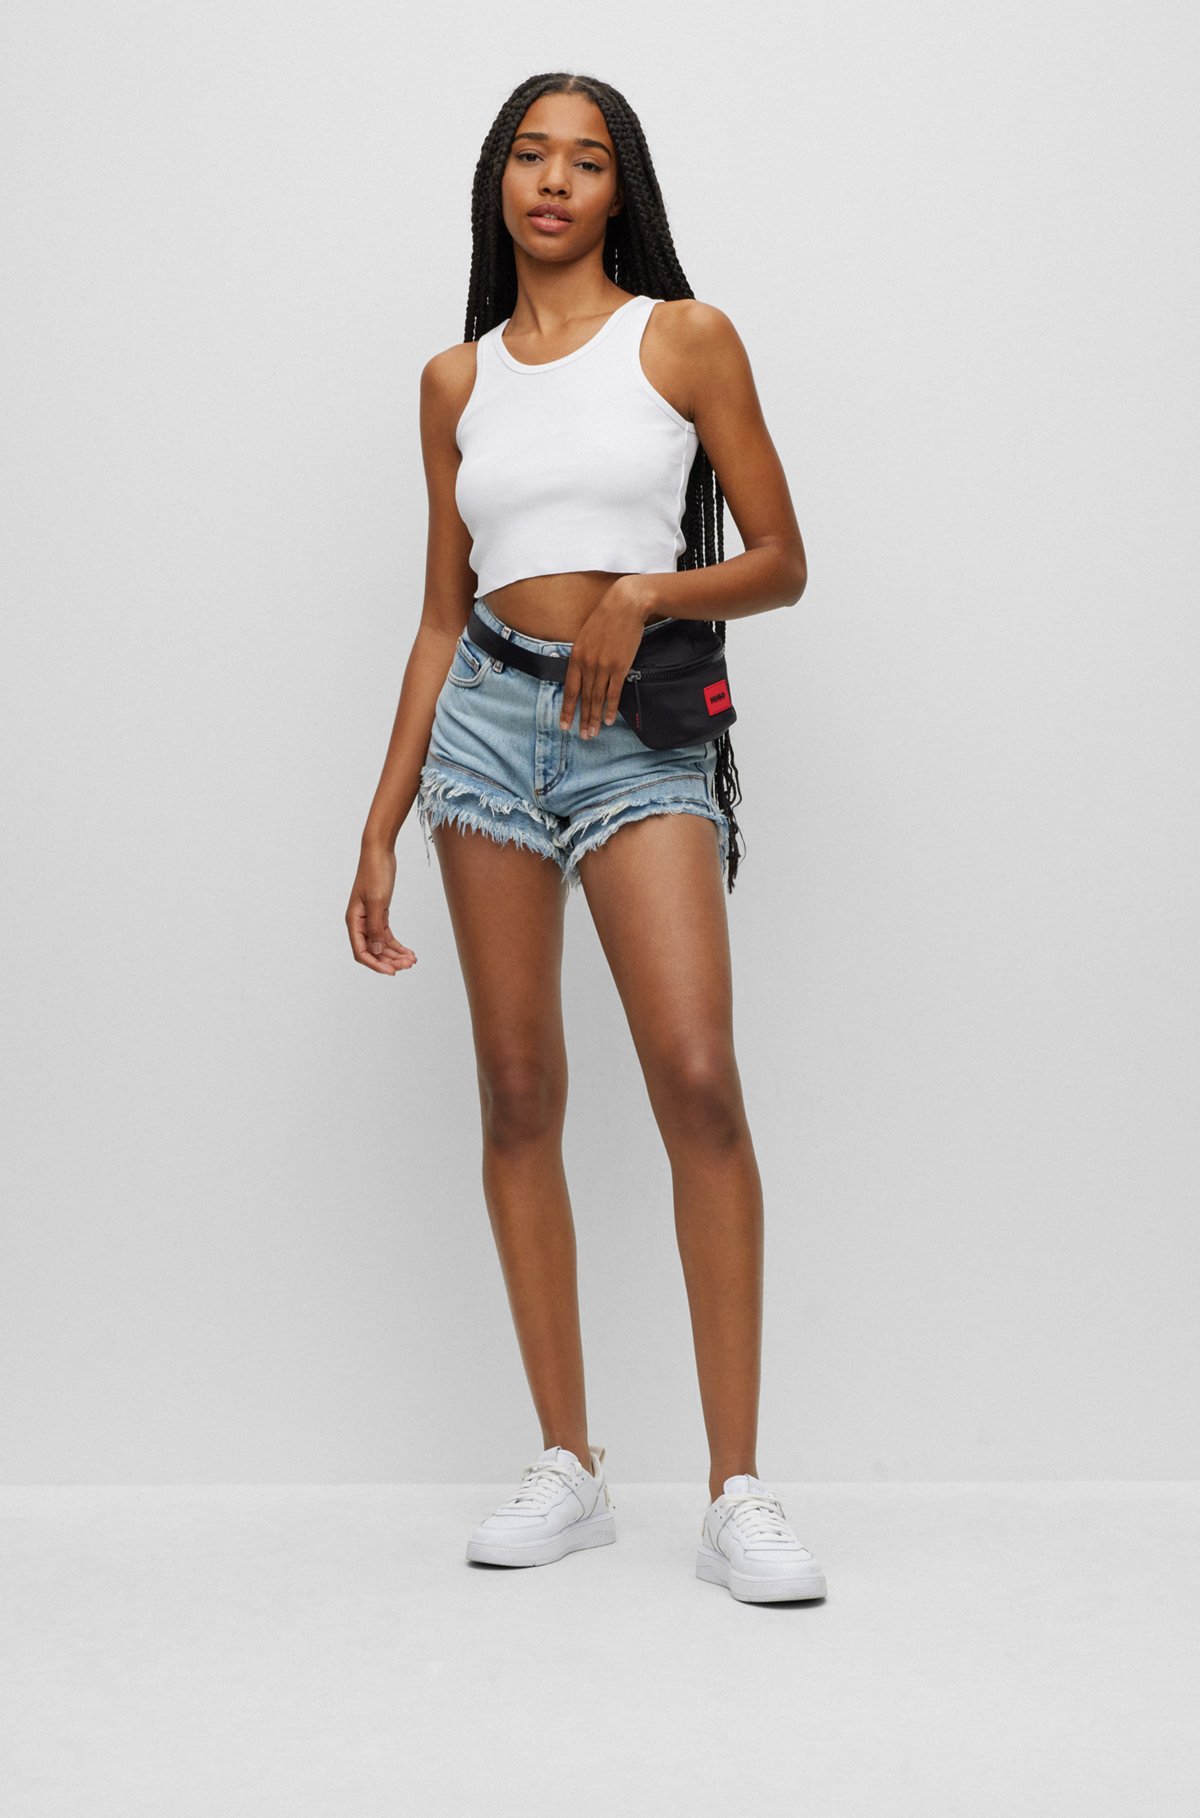 HUGO - Cropped slim-fit tank top in stretch cotton